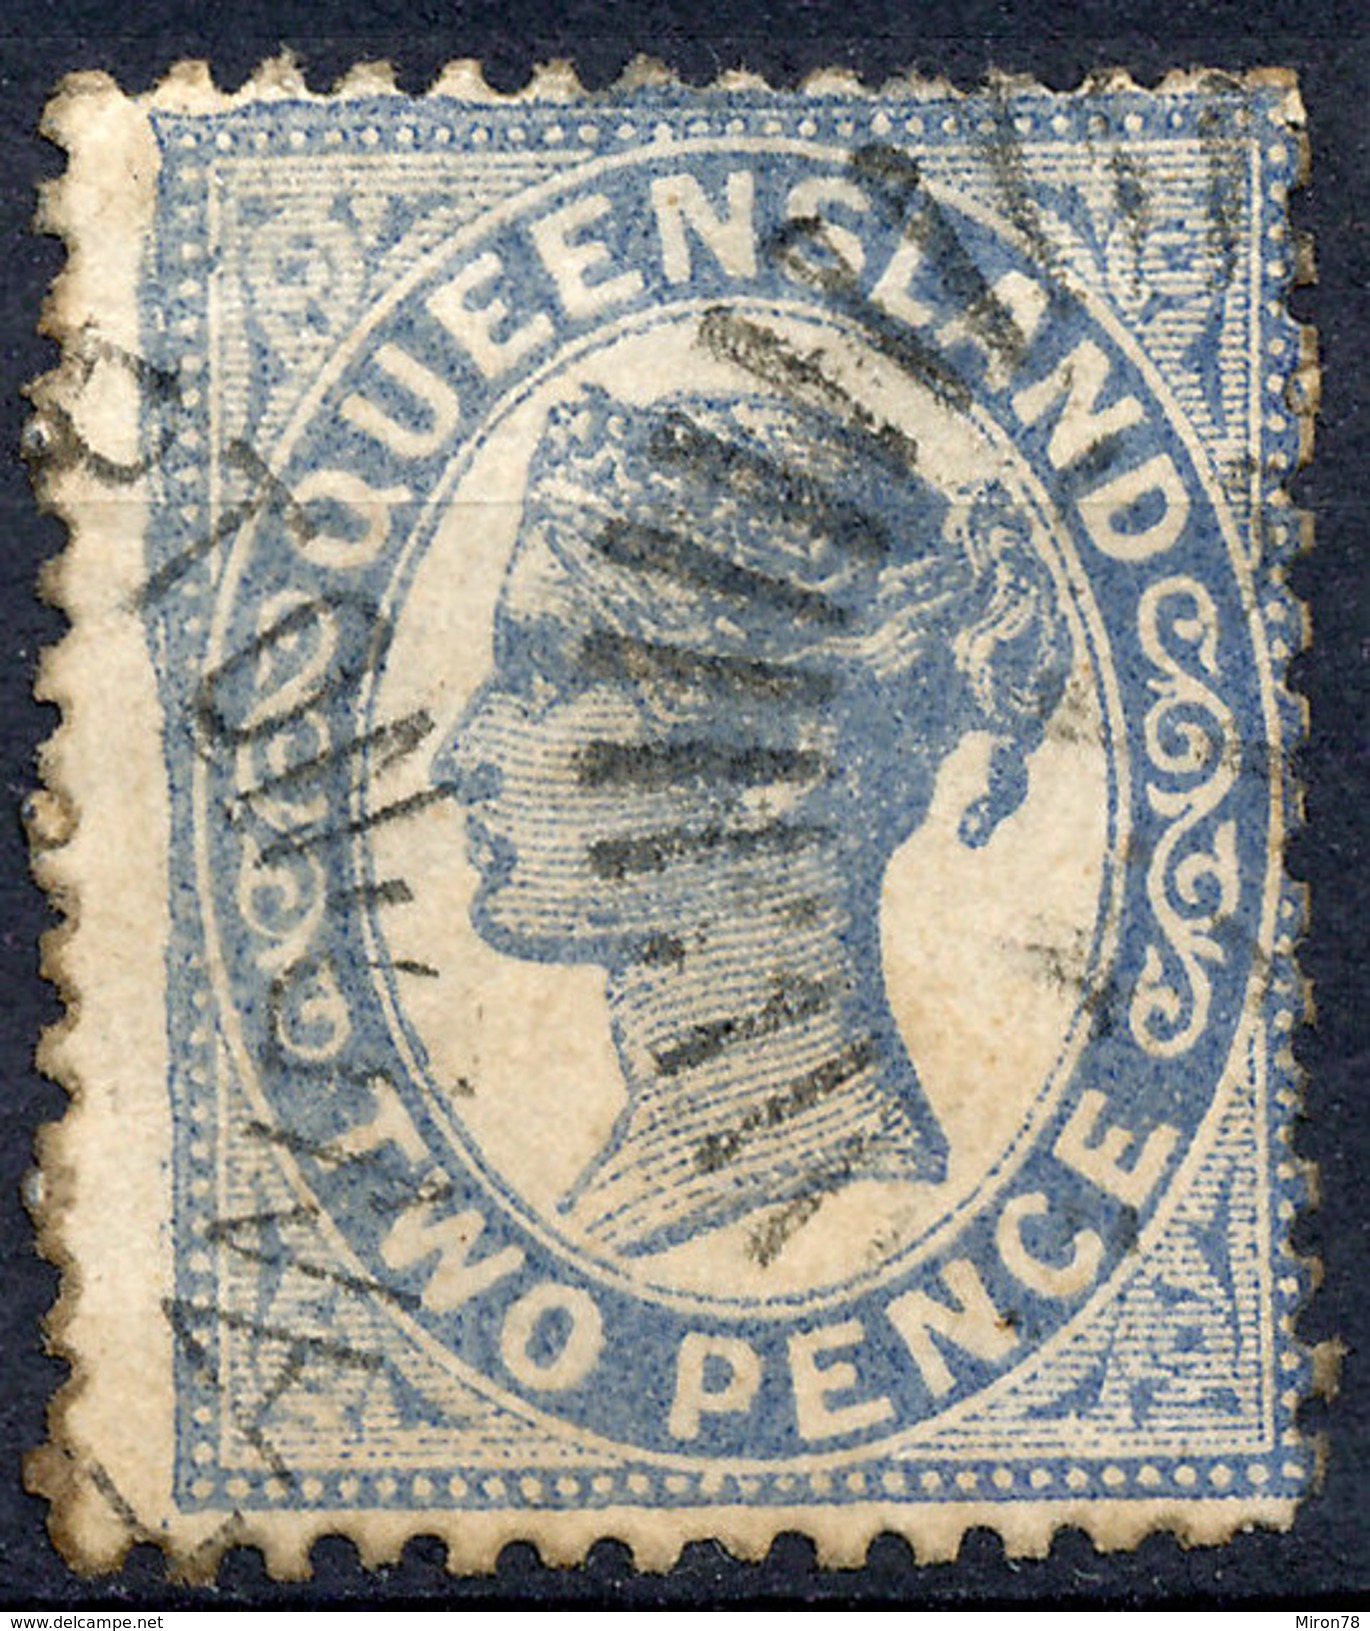 Stamp QUEENSLAND Queen Victoria 2p Used Lot#37 - Used Stamps